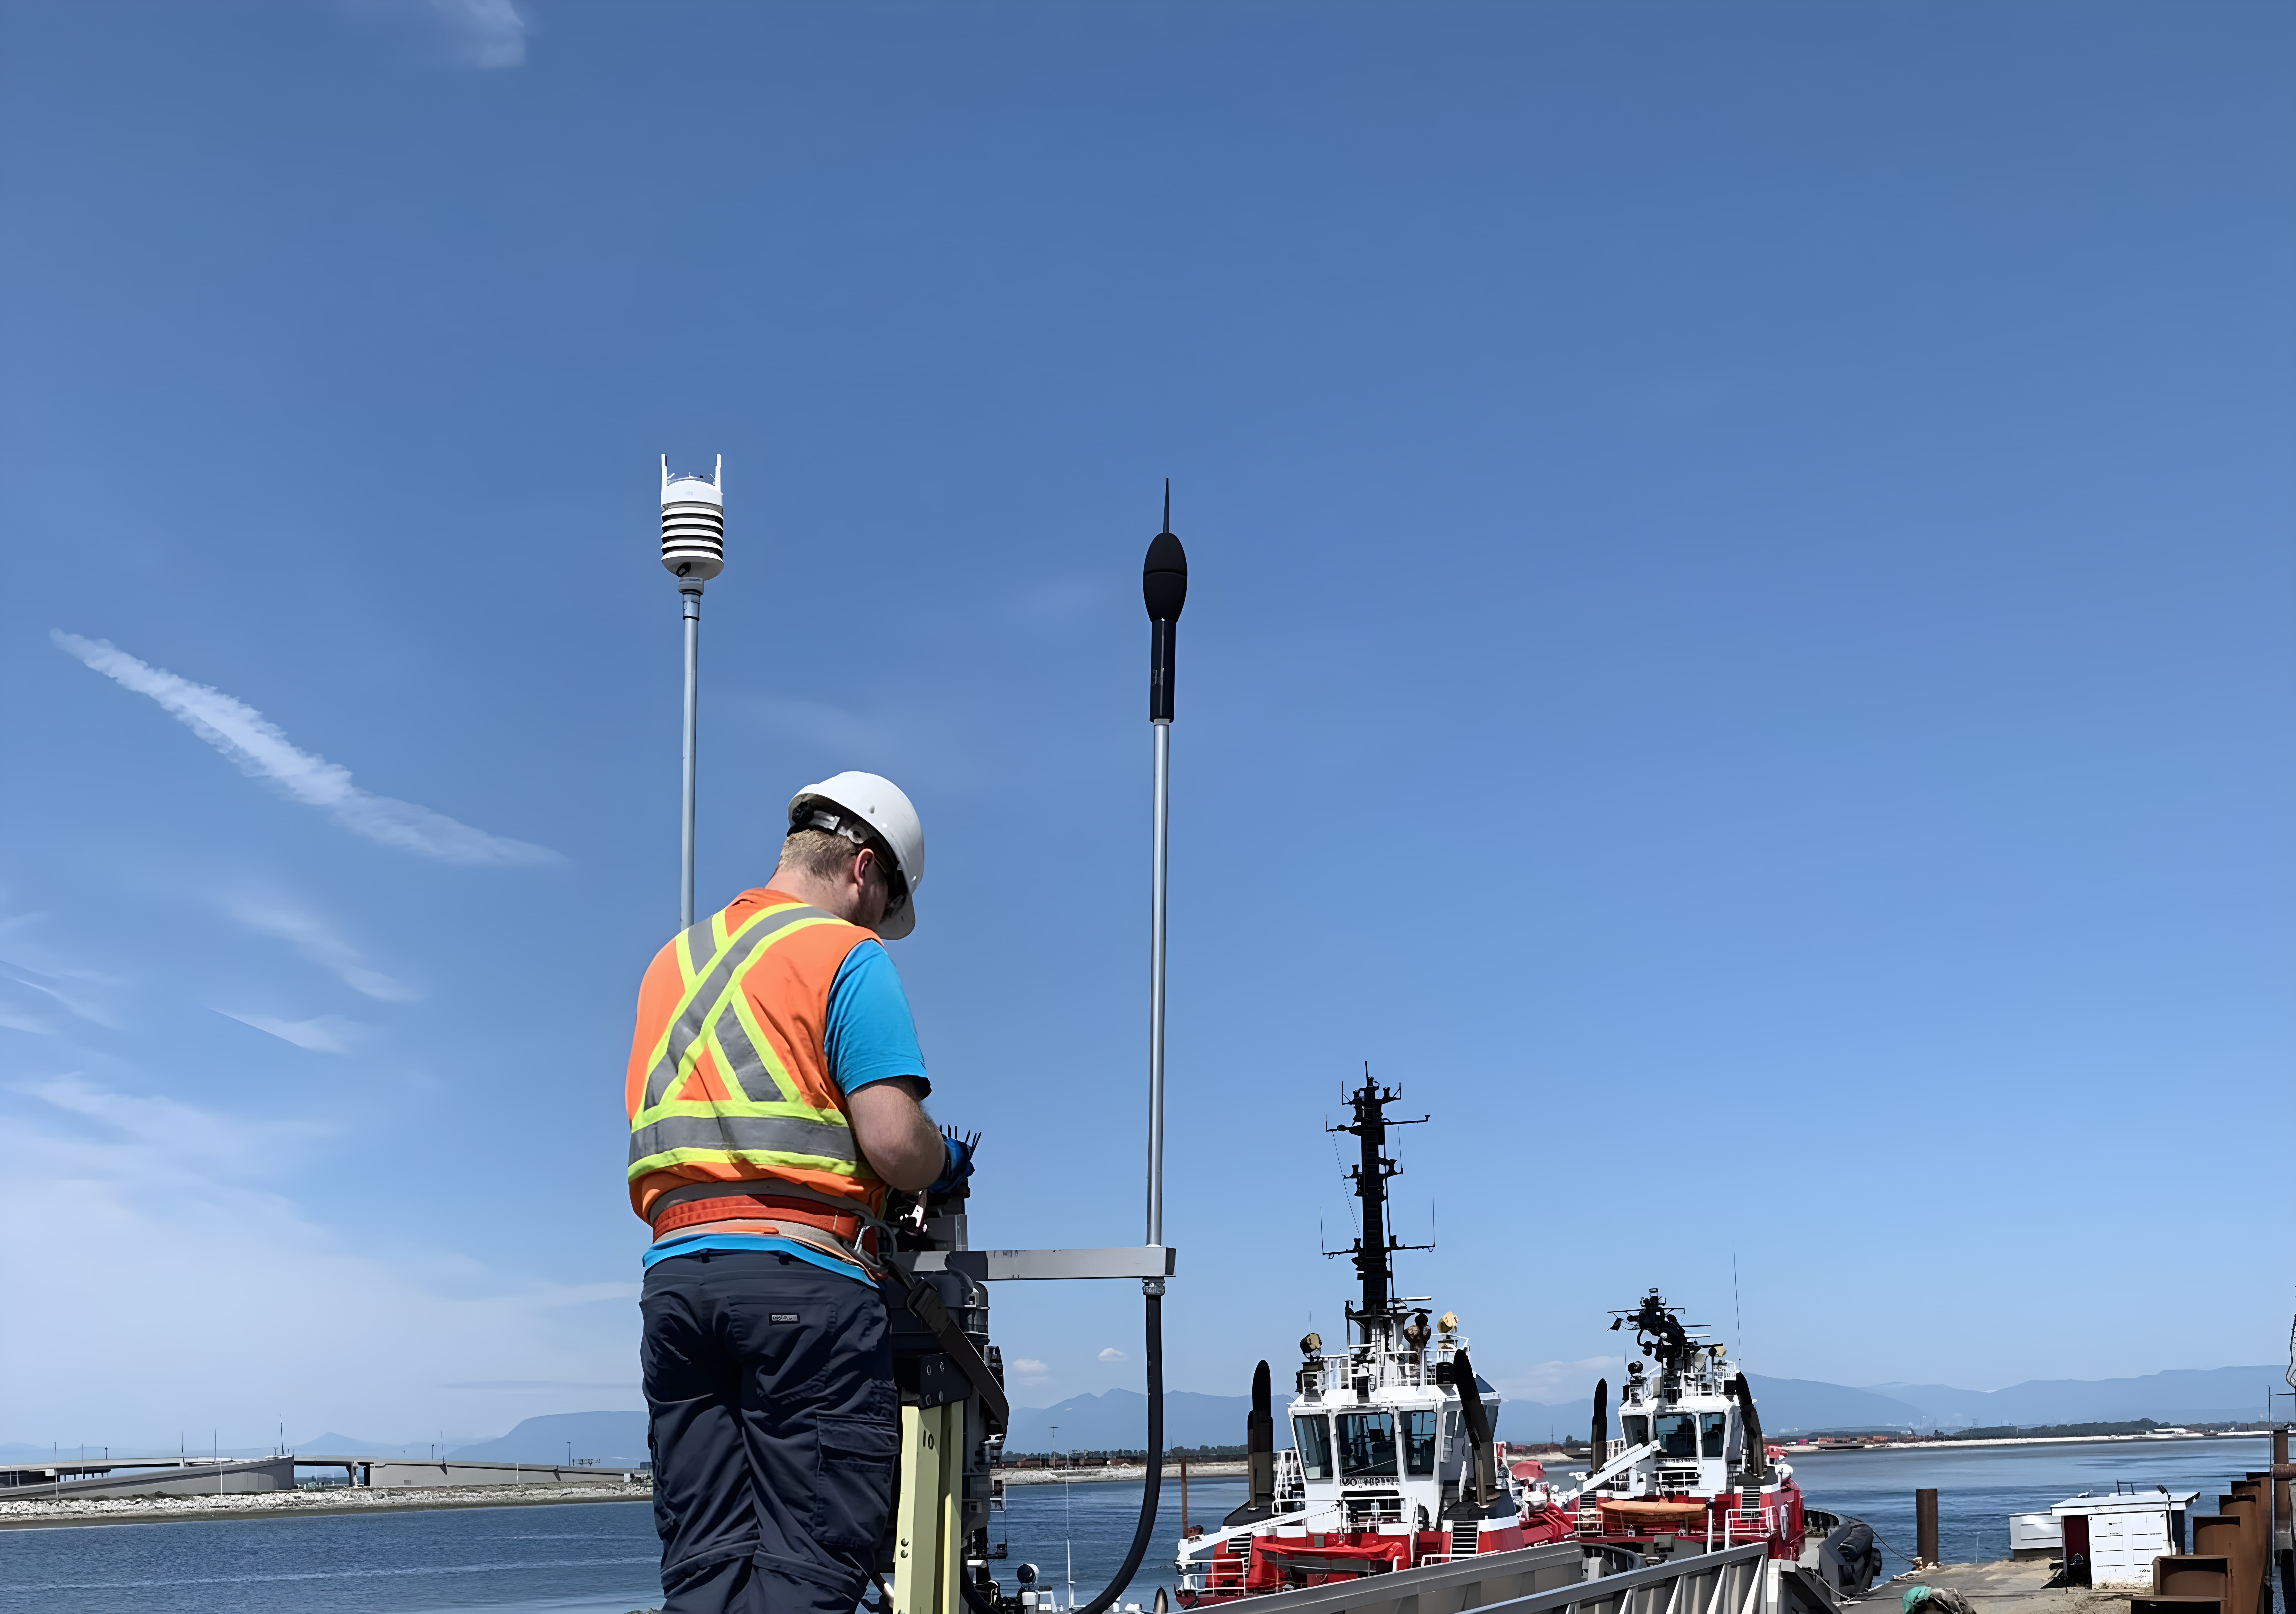 A worker deploying and calibrating monitoring sensors in the field, sound level meter and weather sensor